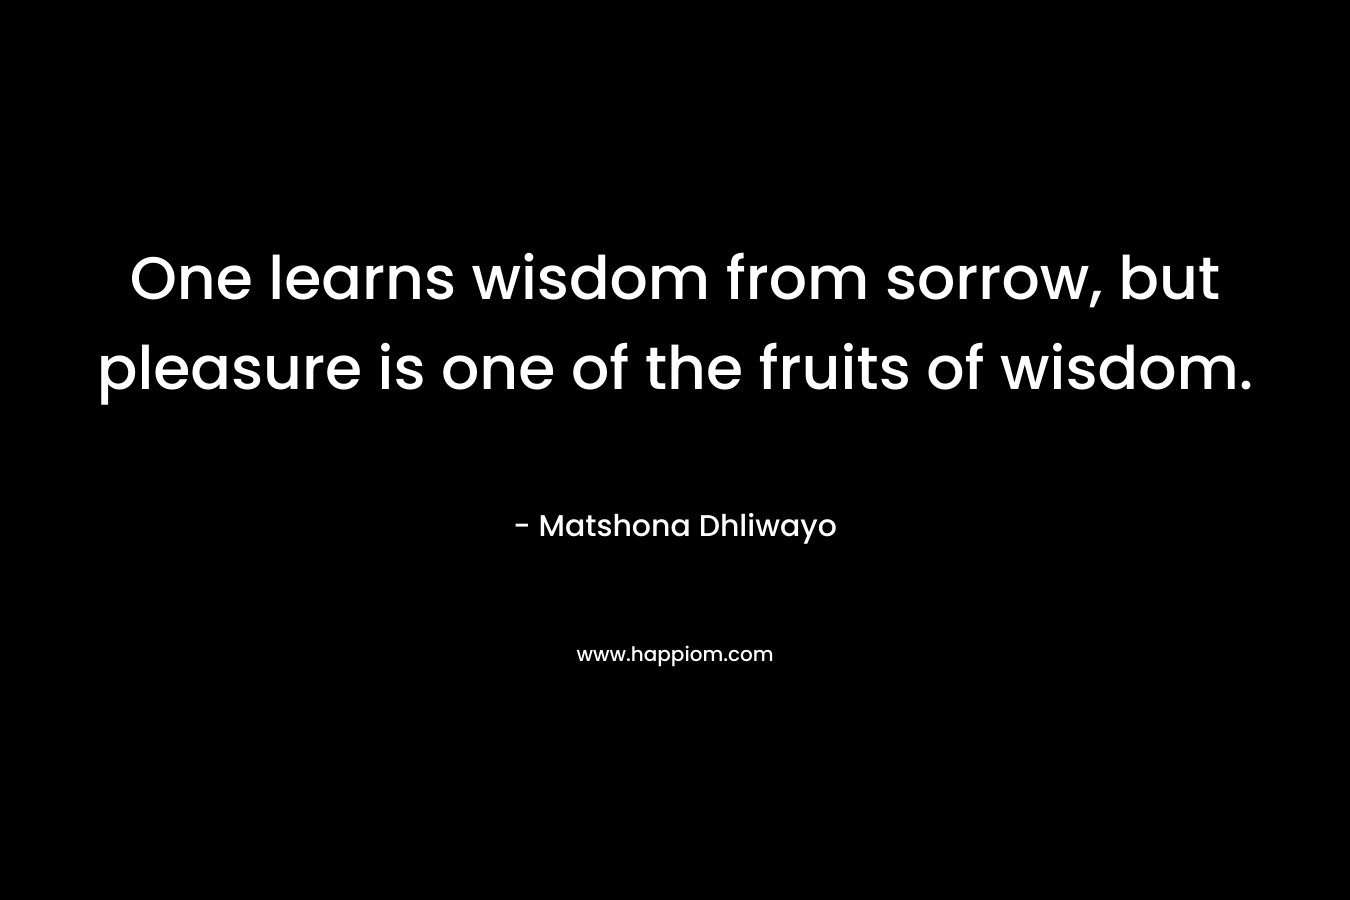 One learns wisdom from sorrow, but pleasure is one of the fruits of wisdom.